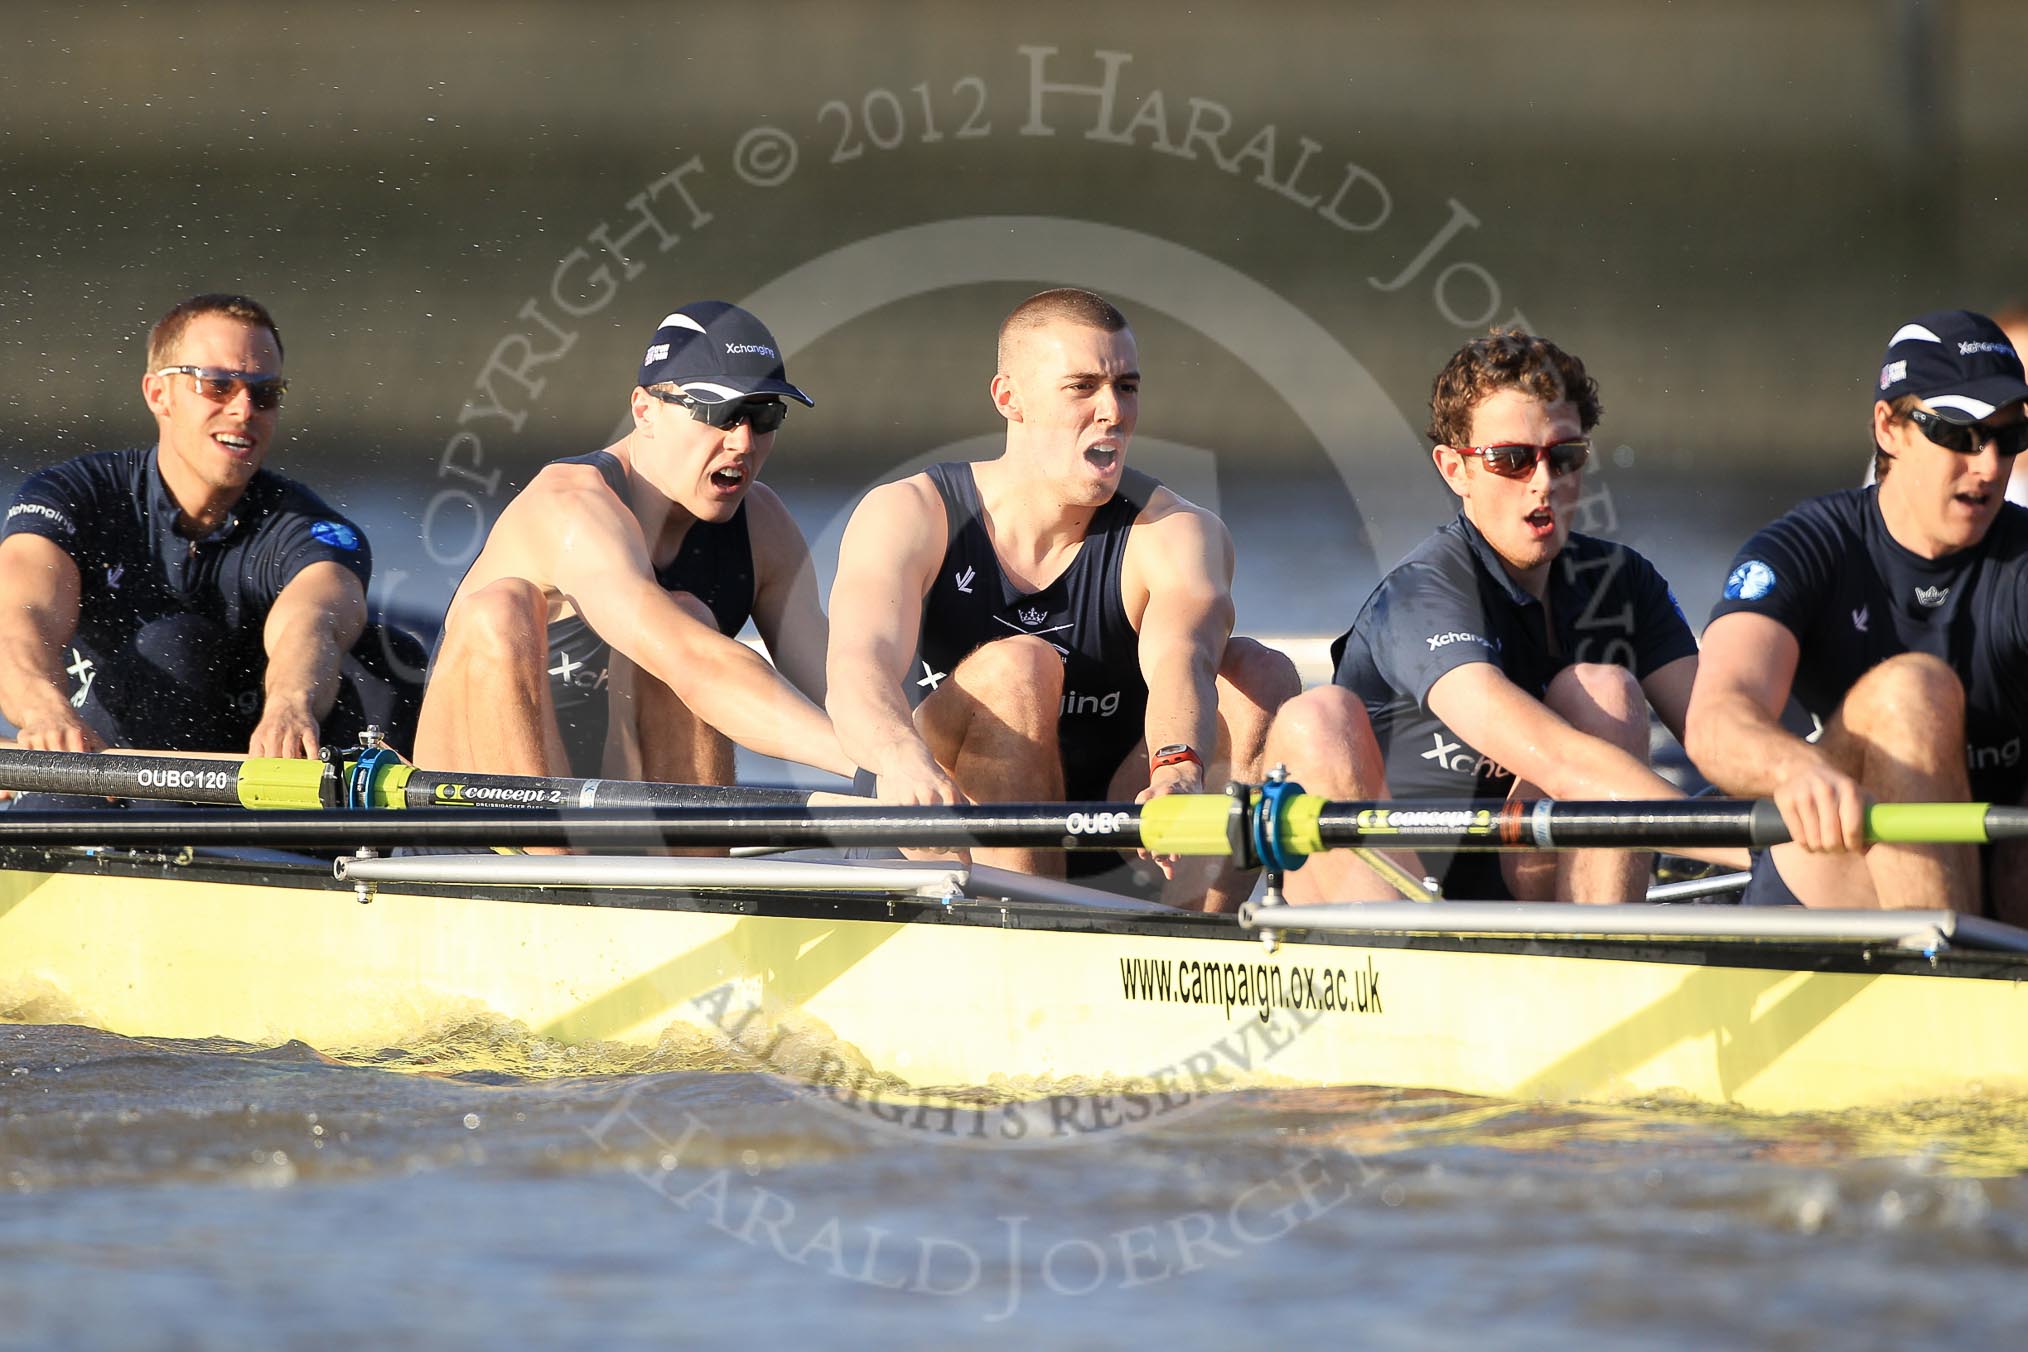 The Boat Race season 2012 - fixture OUBC vs German U23: The Oxford Blue Boat - from left to right Dr. Hanno Wienhausen, Karl Hudspith, Alex Davidson, Dan Harvey, and stern Roel Haen..
River Thames between Putney and Mortlake,
London,

United Kingdom,
on 26 February 2012 at 15:26, image #54